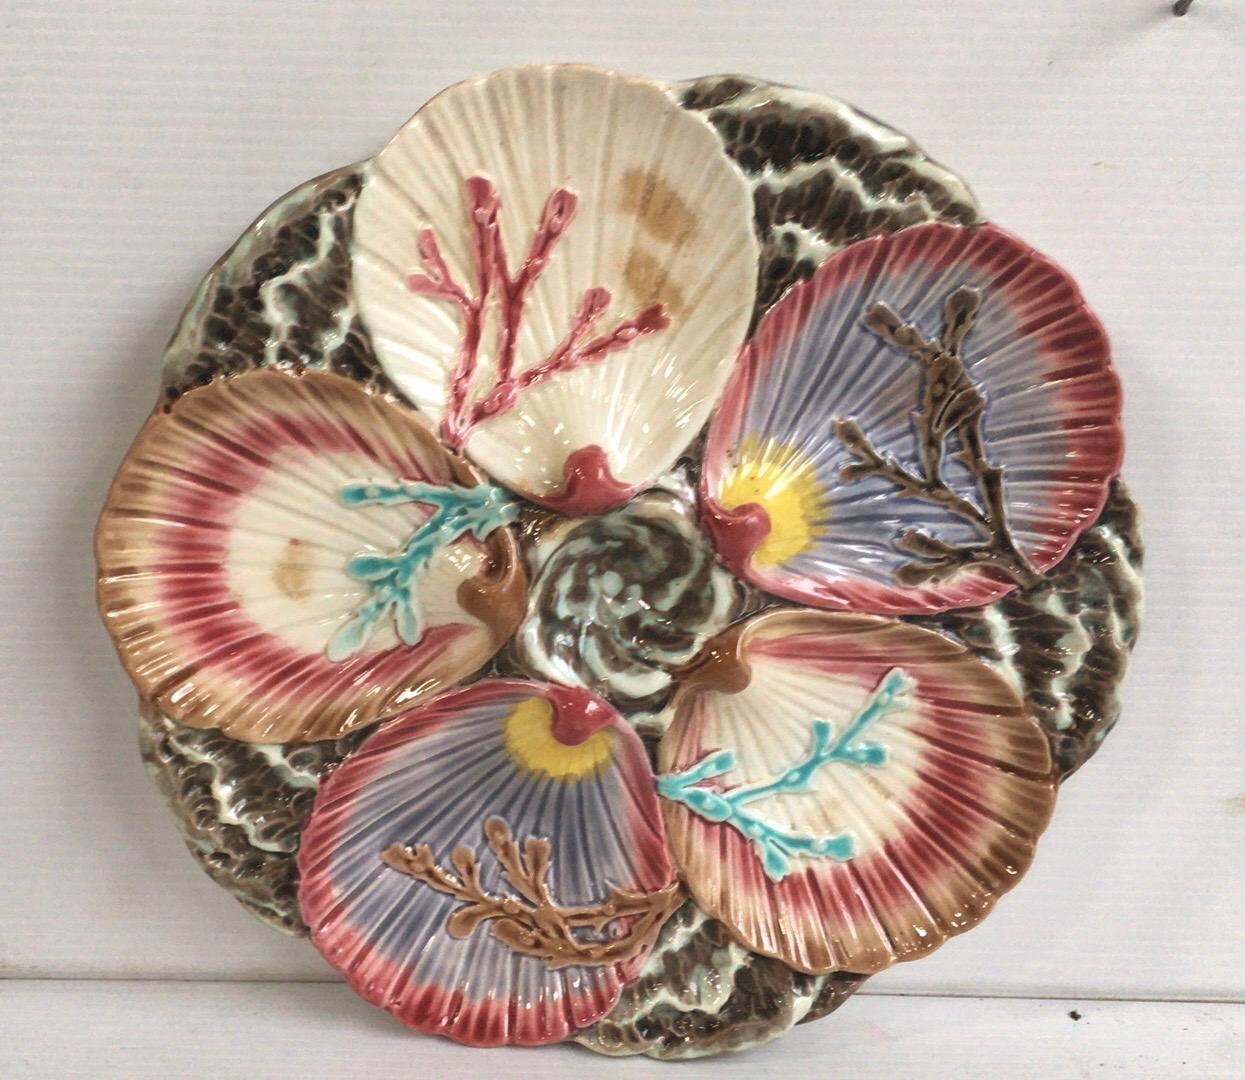 Majolica oyster plate Wedgwood with seaweeds and shells, circa 1880.